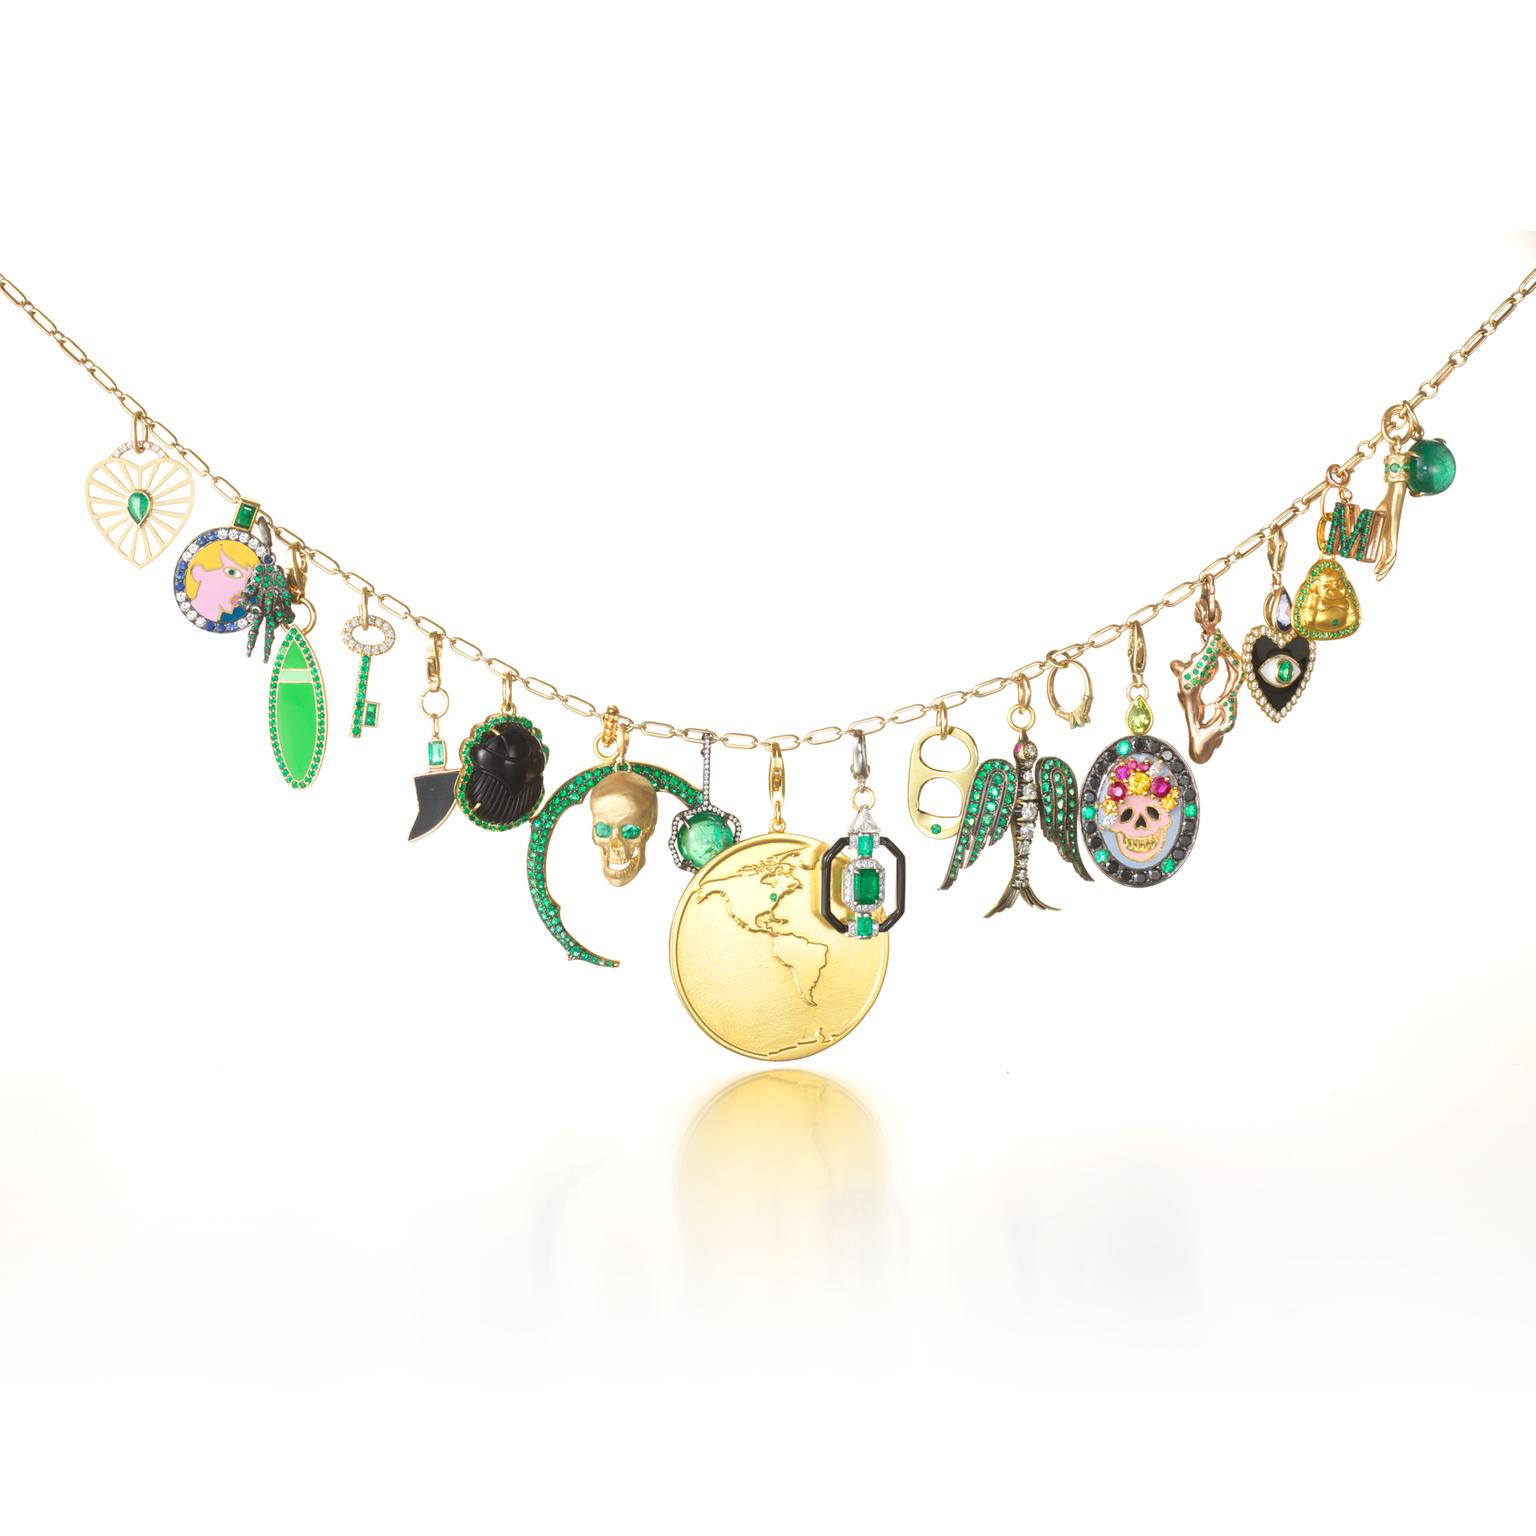 Muse x Gemfields charm necklace with emeralds